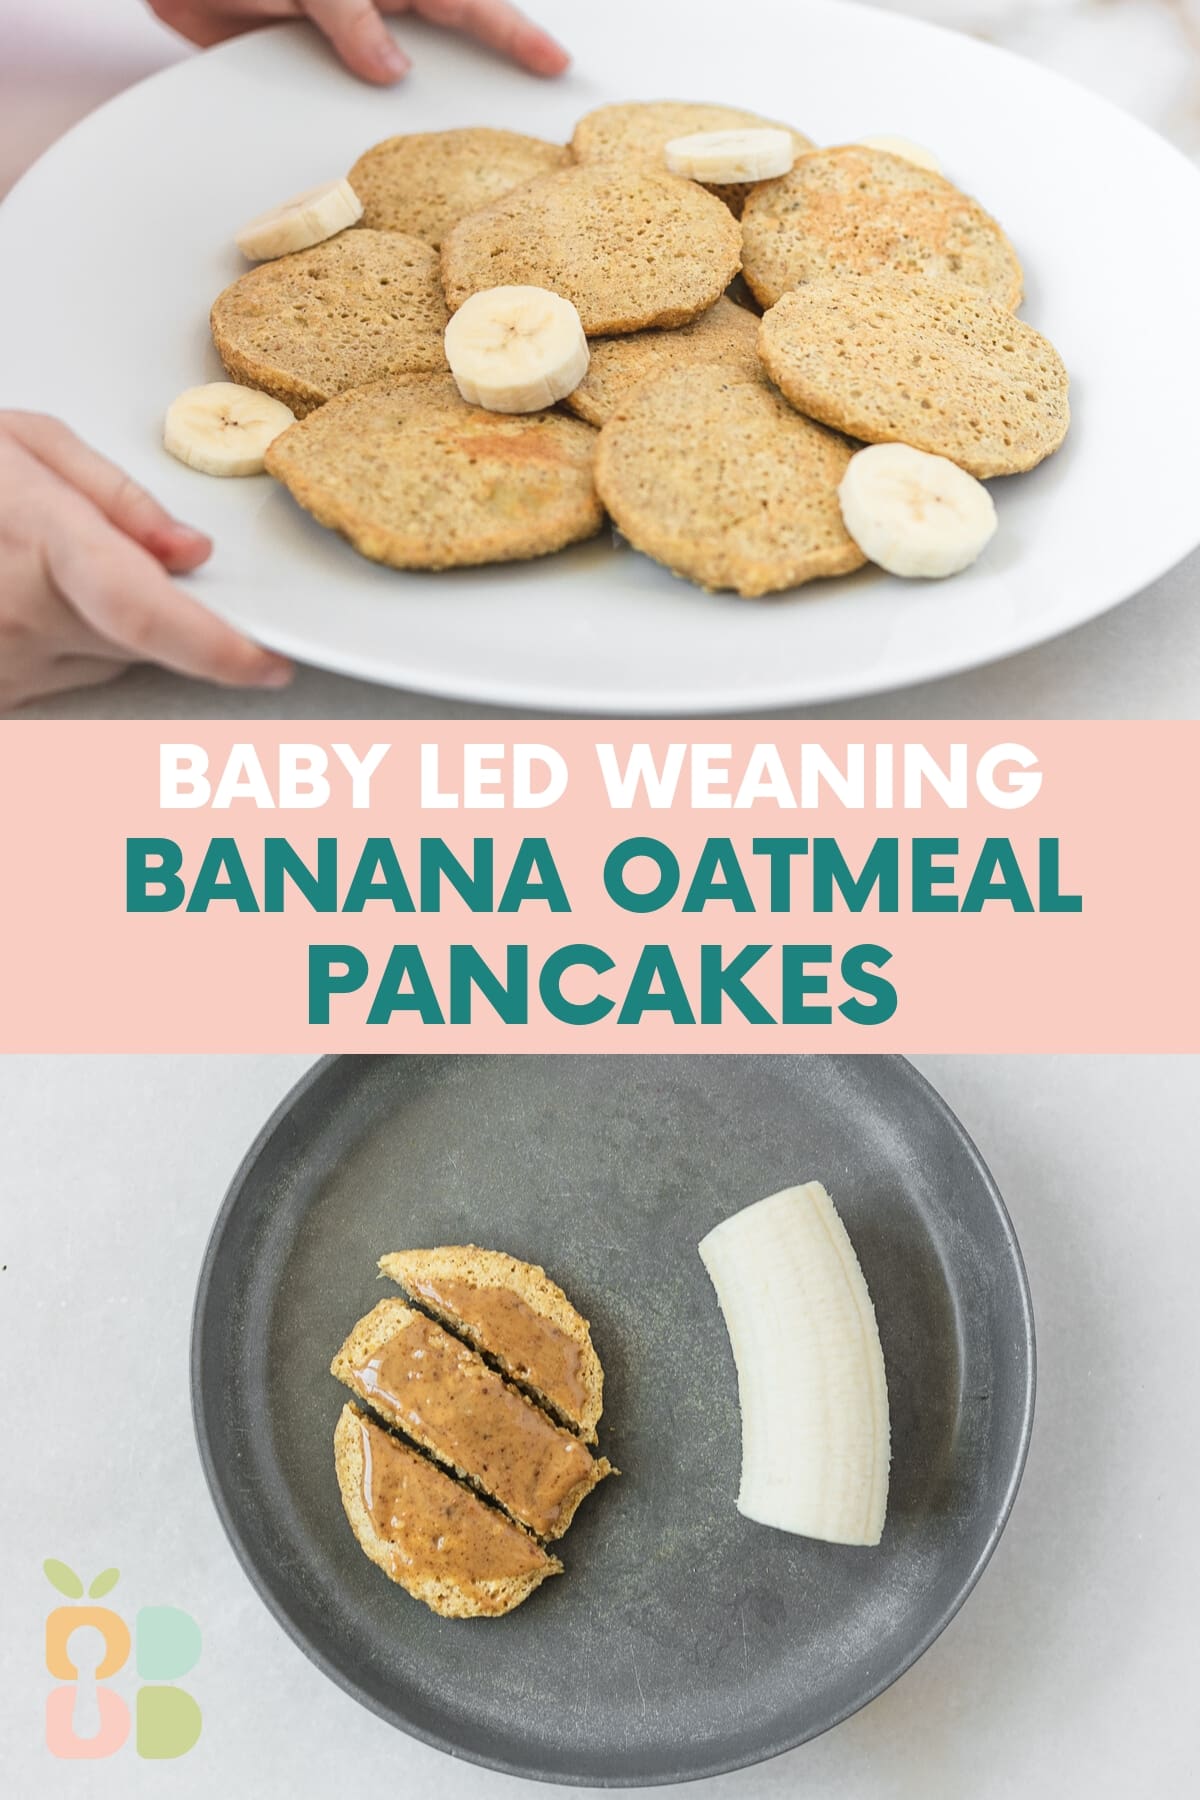 two image collage of a plate of baby banana oatmeal pancakes on a plate, and a baby plate with cut up pancake with a banana with text overlay.